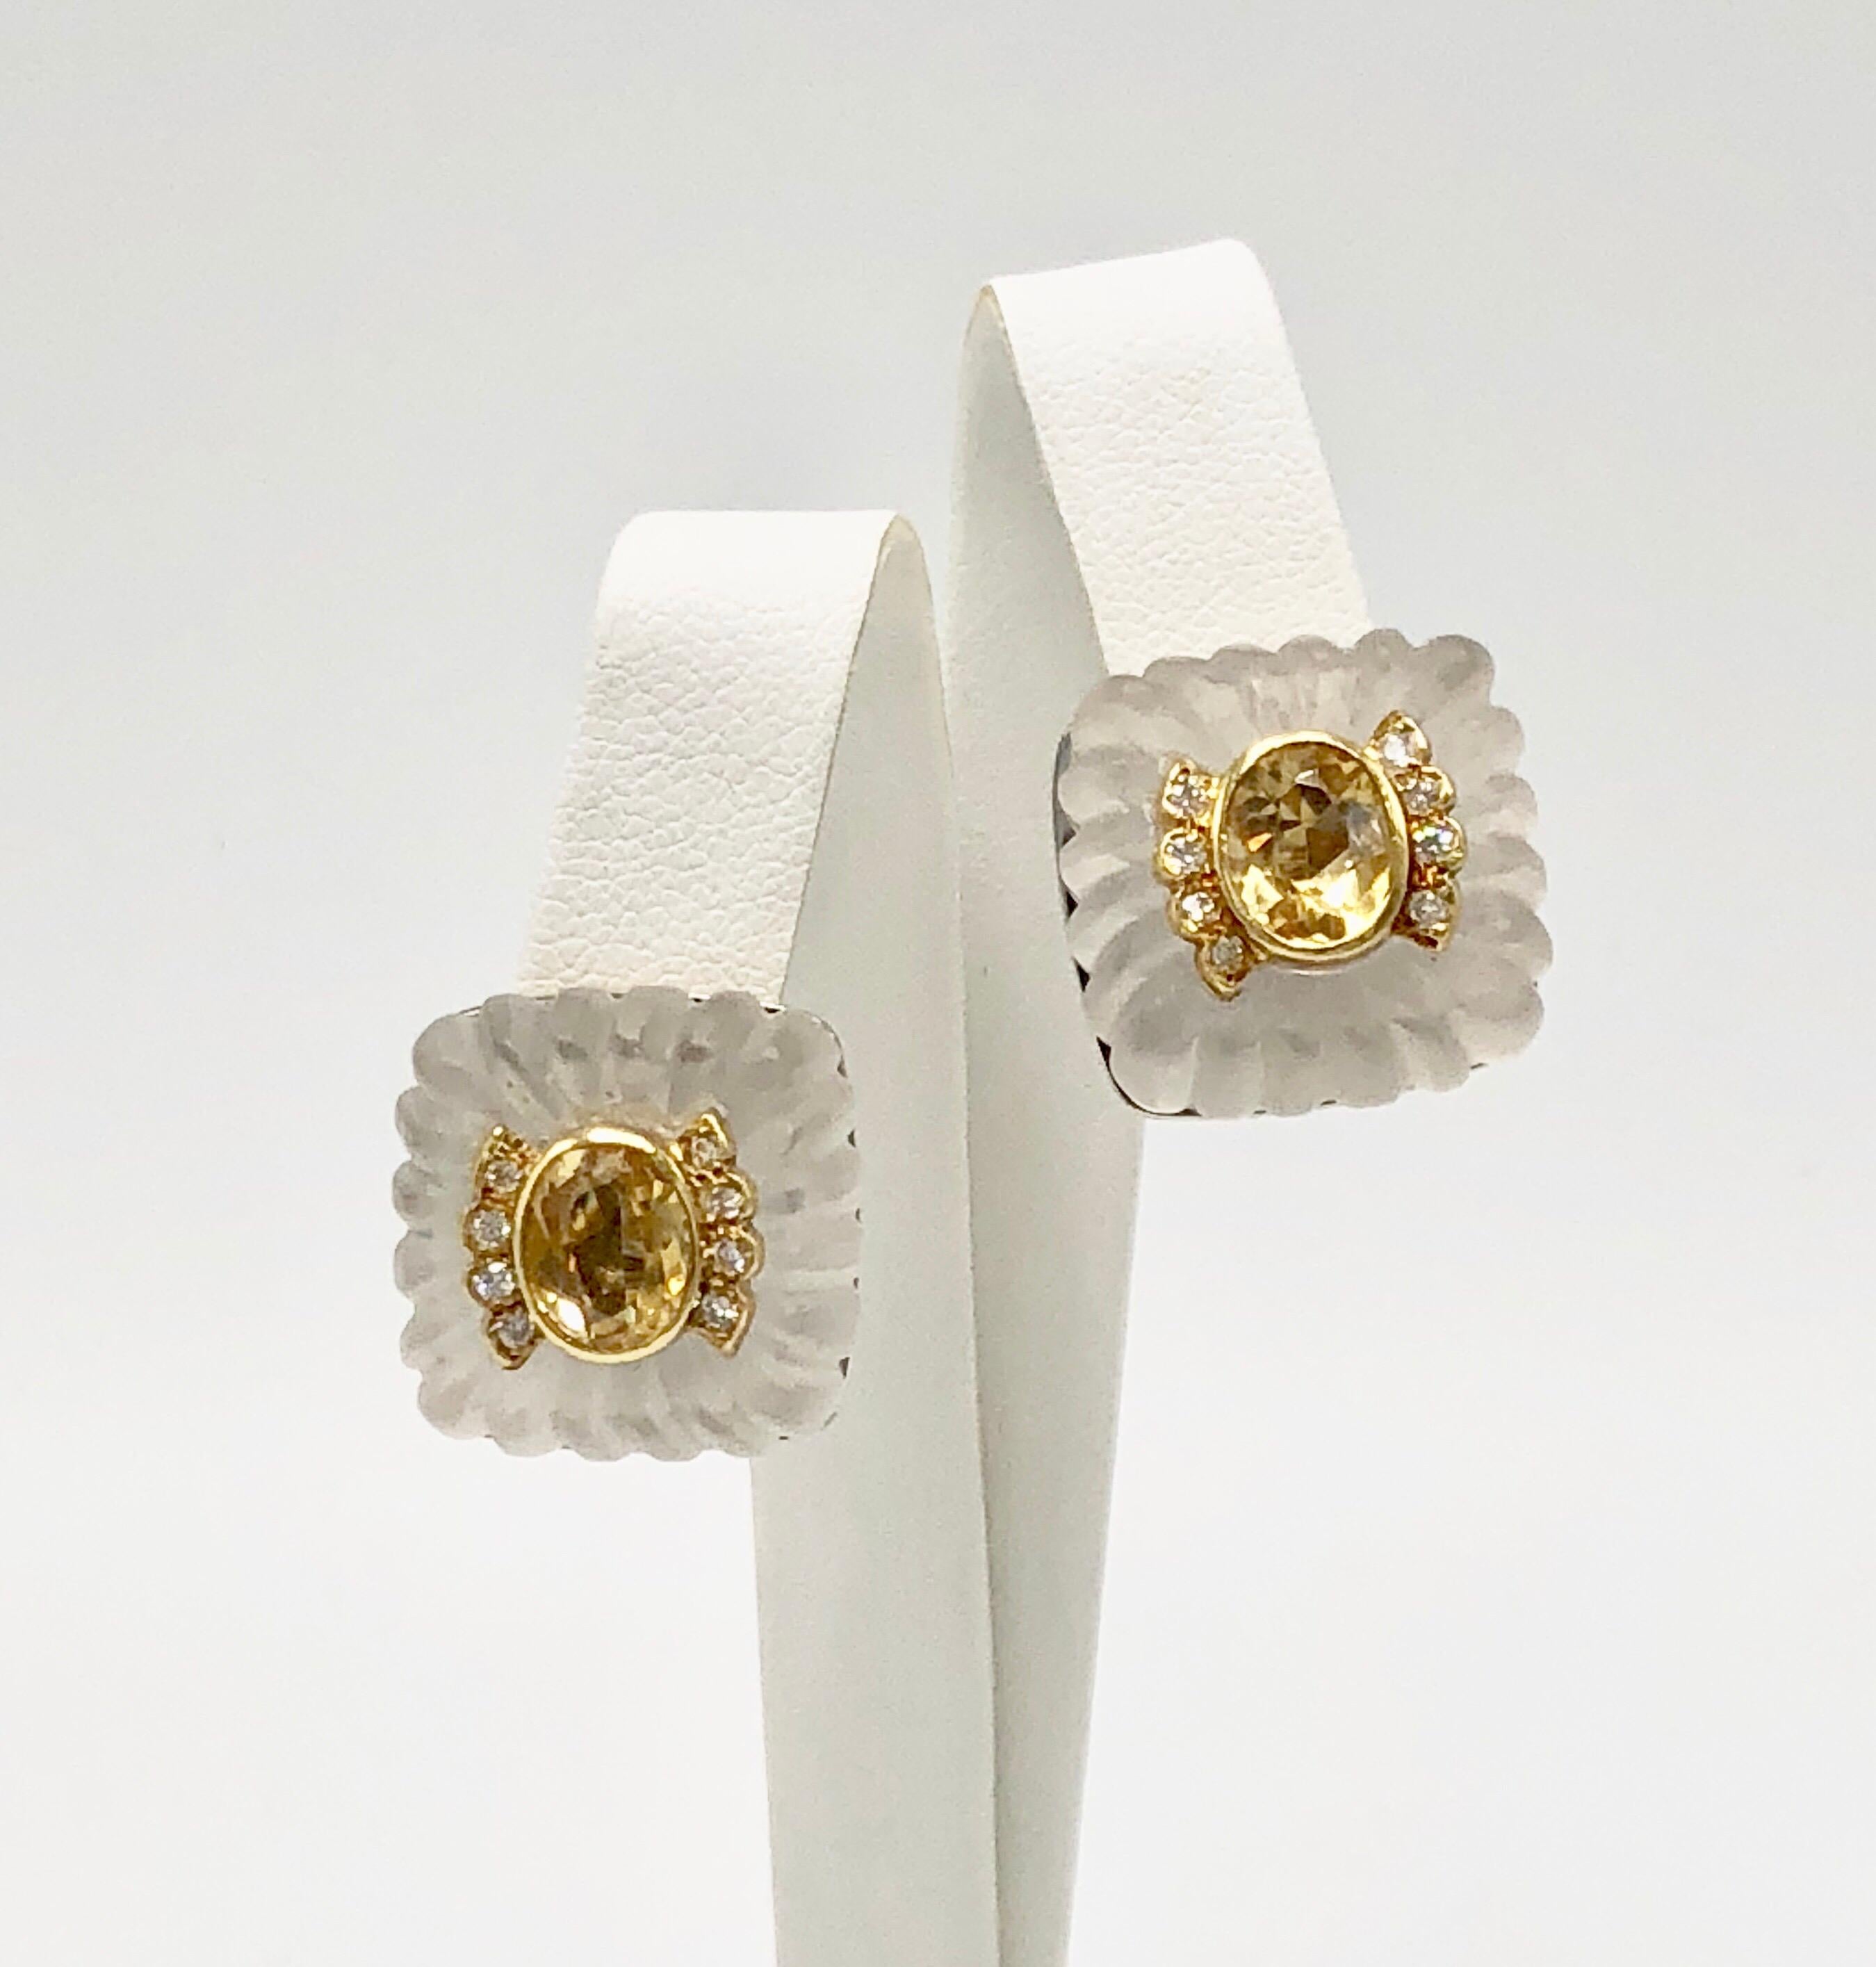 Beautiful Clip On Earrings with .32 Carats of Diamonds with 2 carat Citrine. 

Frosted rock crystal quartz with medium light yellow Citrine.  Clip on earrings.  1980's era.  

14 K Gold Frame, High Gloss Finish. 